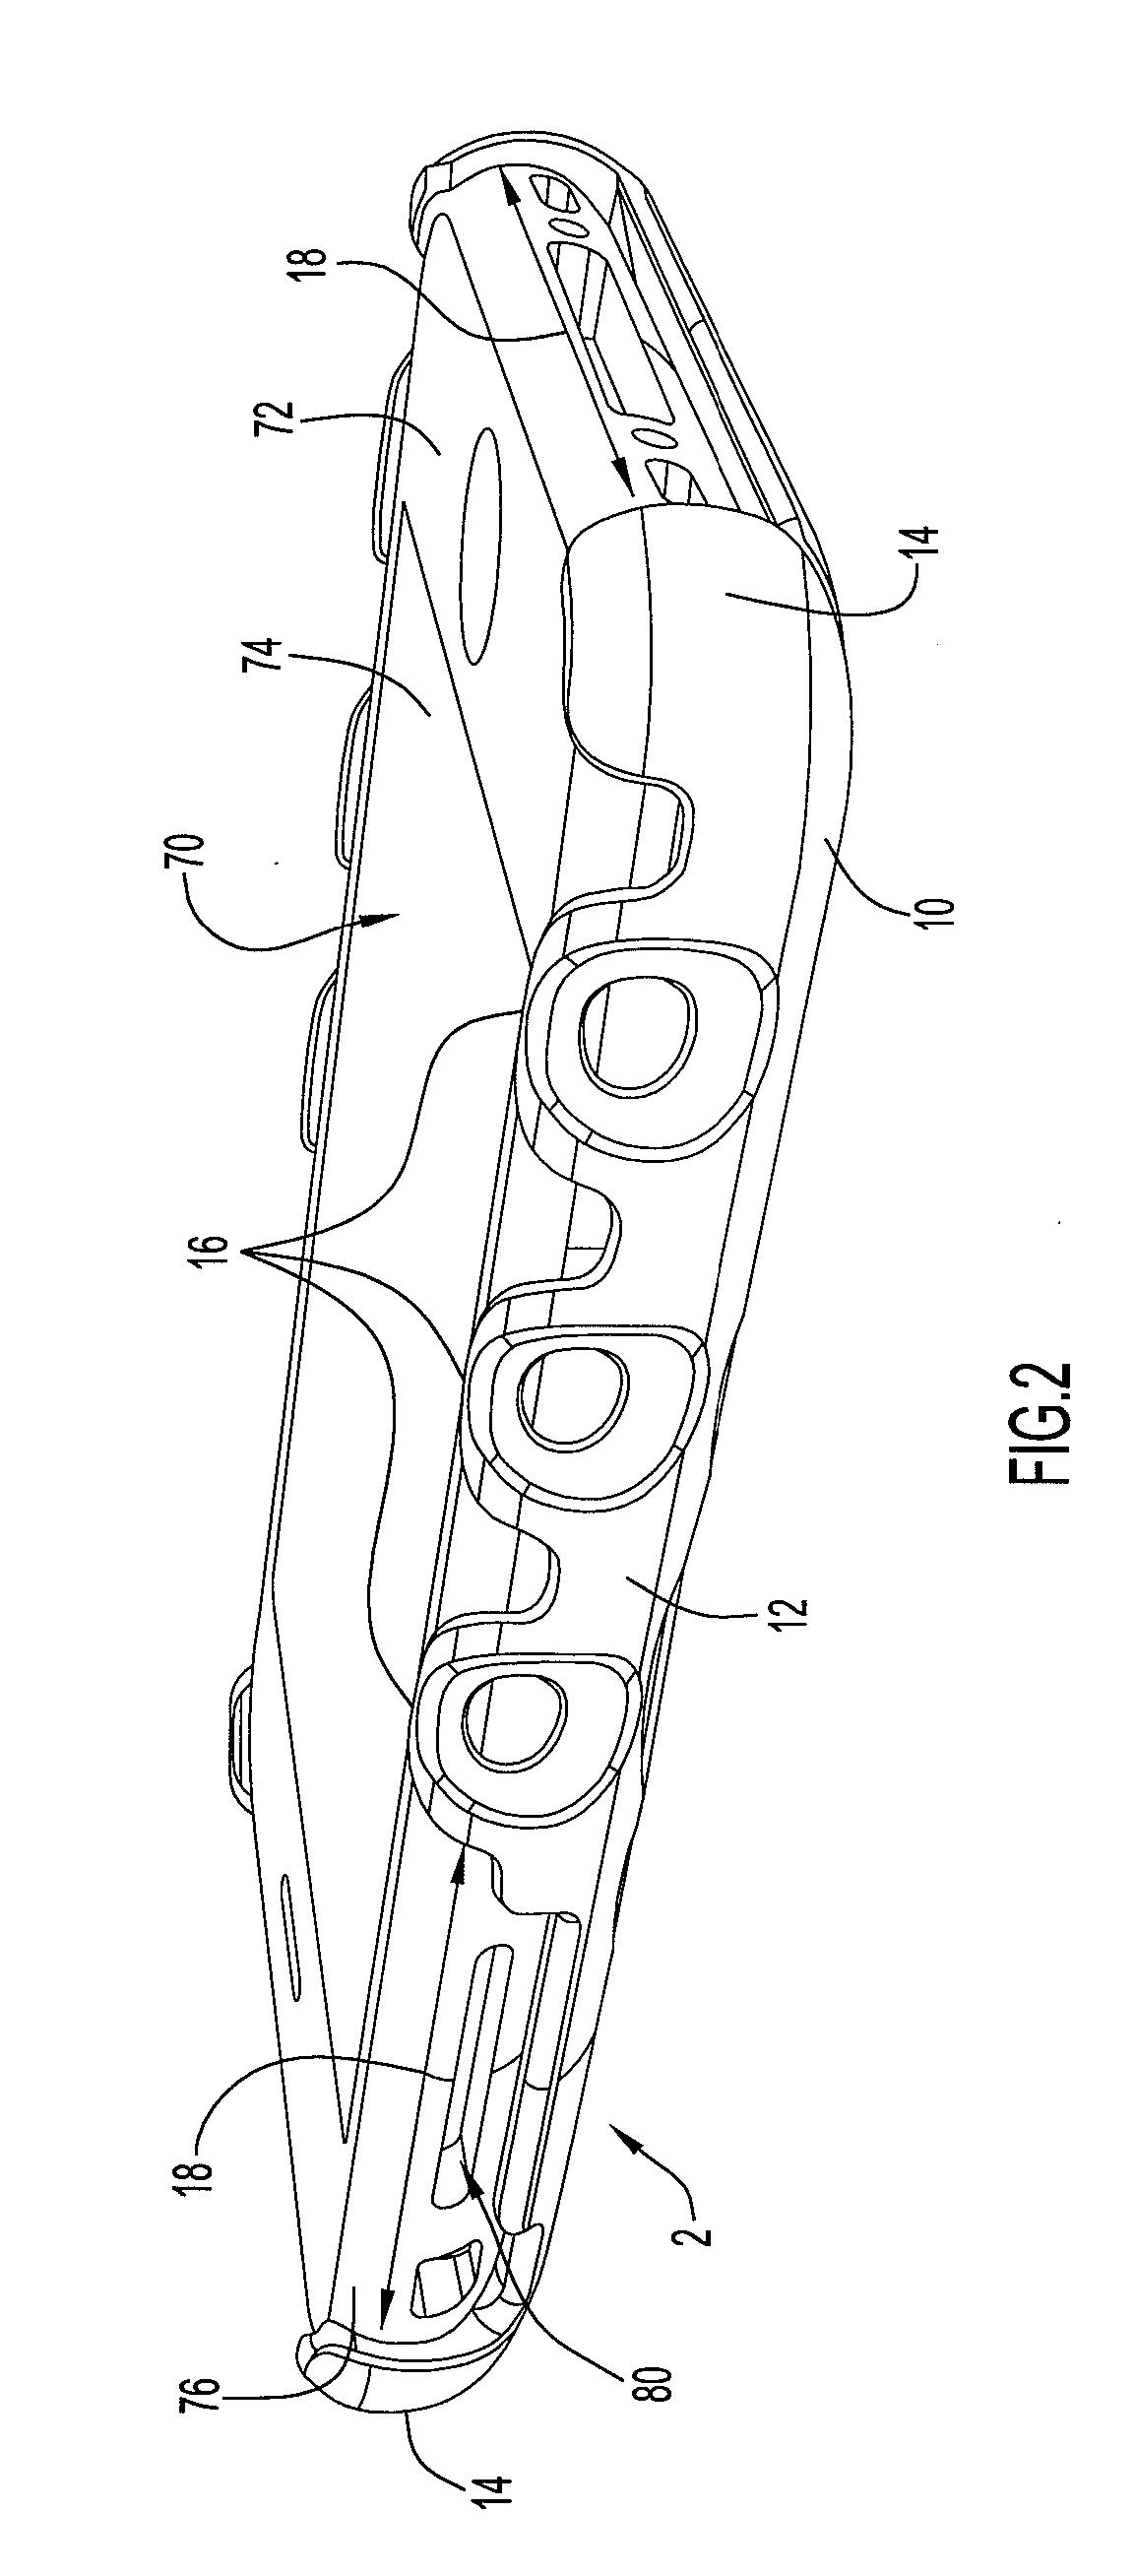 Holder for Electronic Device with Support